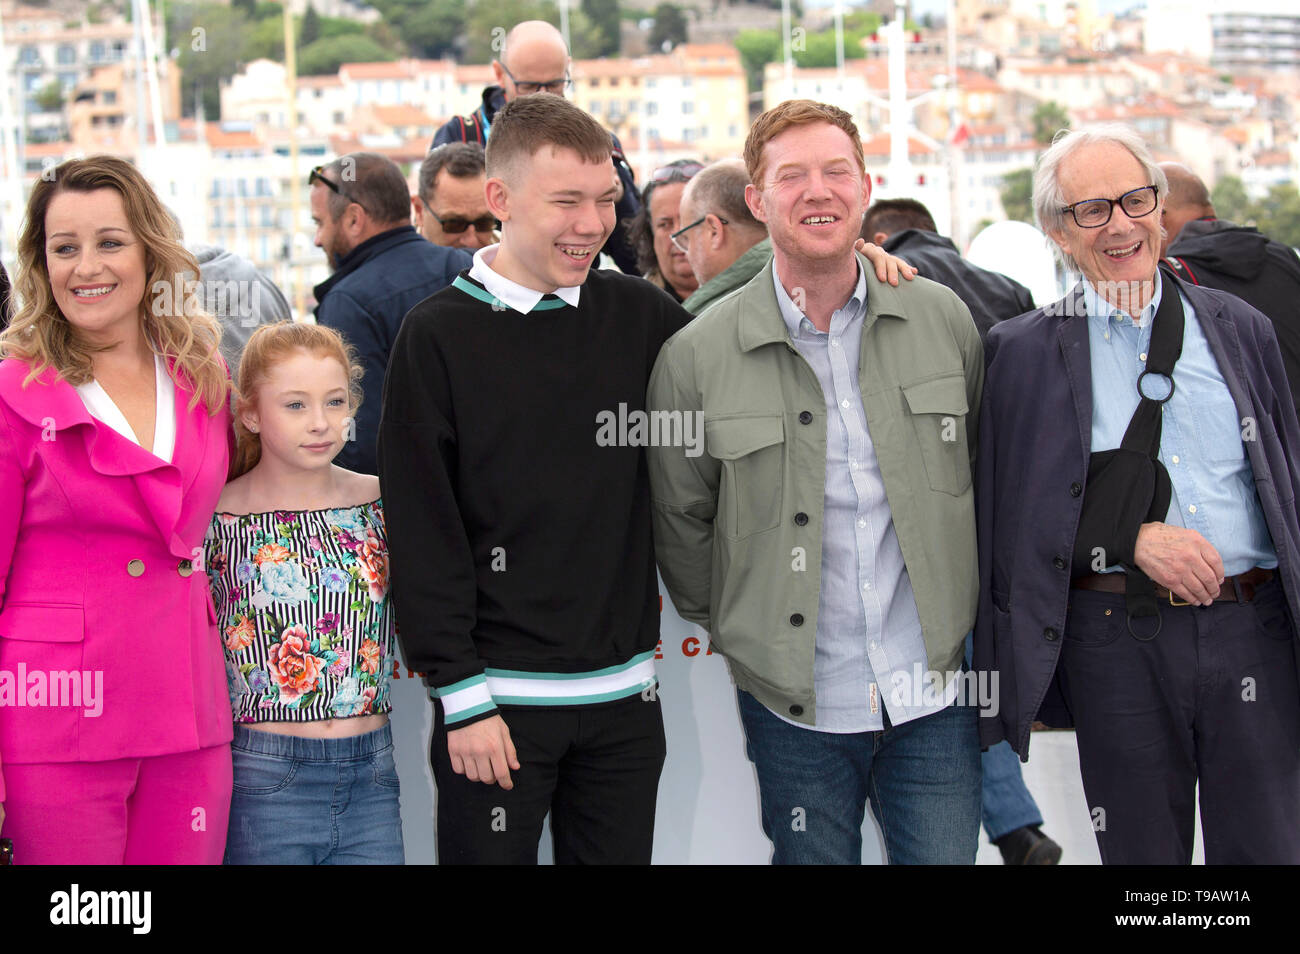 Debbie Honeywood, Katie Proctor, Rhys Stone, Kris Hitchen and Ken Loach at the 'Sorry We Missed You' photocall during the 72nd Cannes Film Festival at the Palais des Festivals on May 17, 2019 in Cannes, France Stock Photo